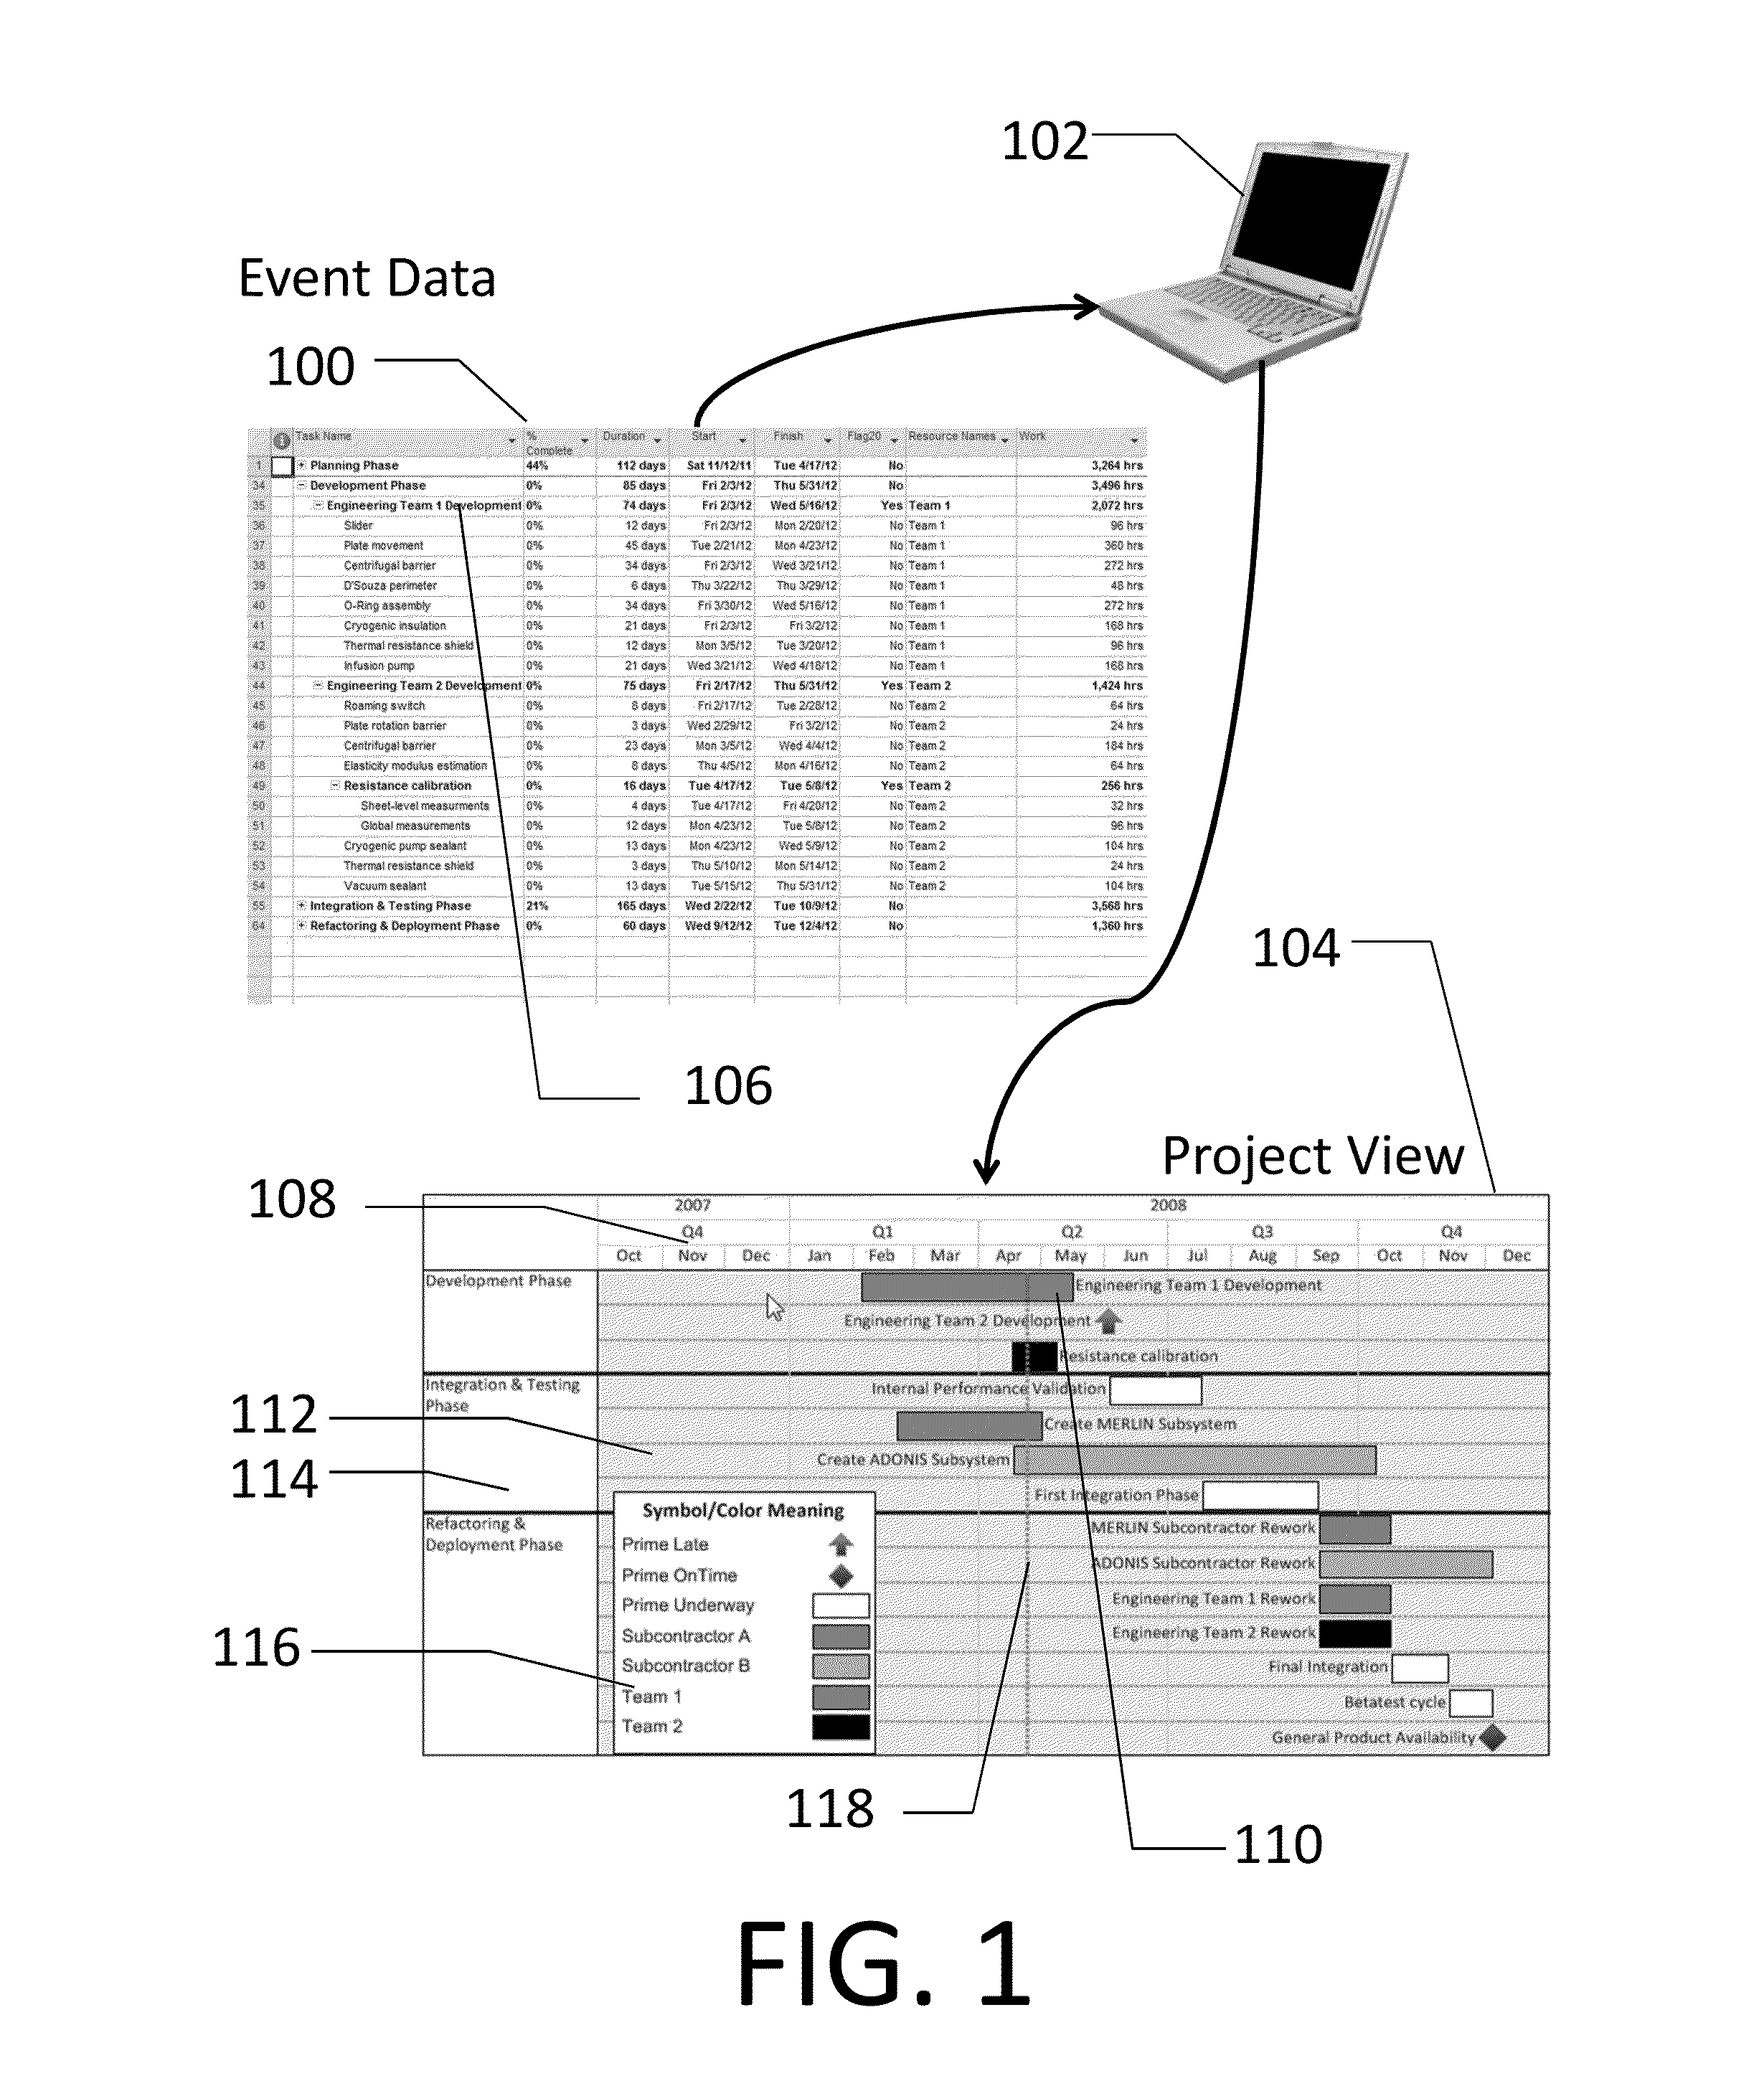 System and method for computing and overwriting the appearance of project tasks and milestones